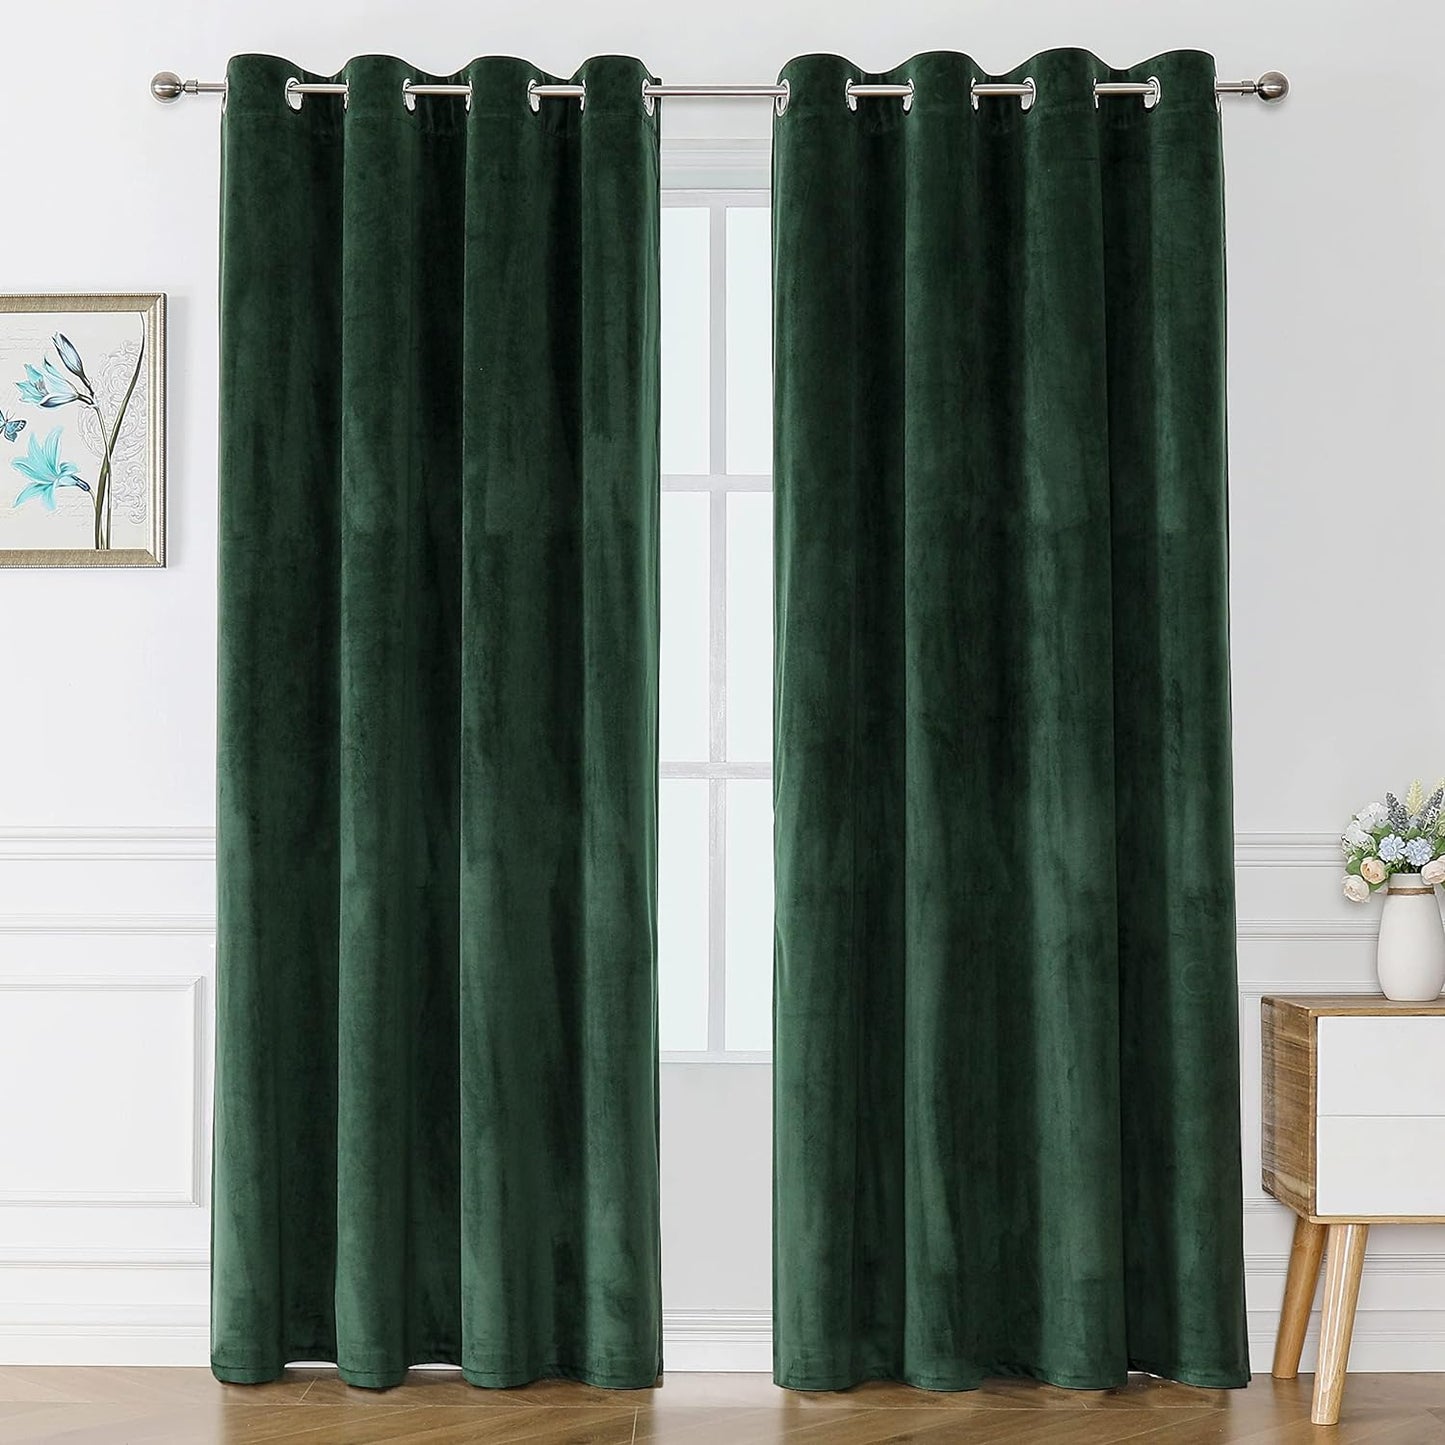 Victree Velvet Curtains for Bedroom, Blackout Curtains 52 X 84 Inch Length - Room Darkening Sun Light Blocking Grommet Window Drapes for Living Room, 2 Panels, Navy  Victree Dark Green 52 X 90 Inches 